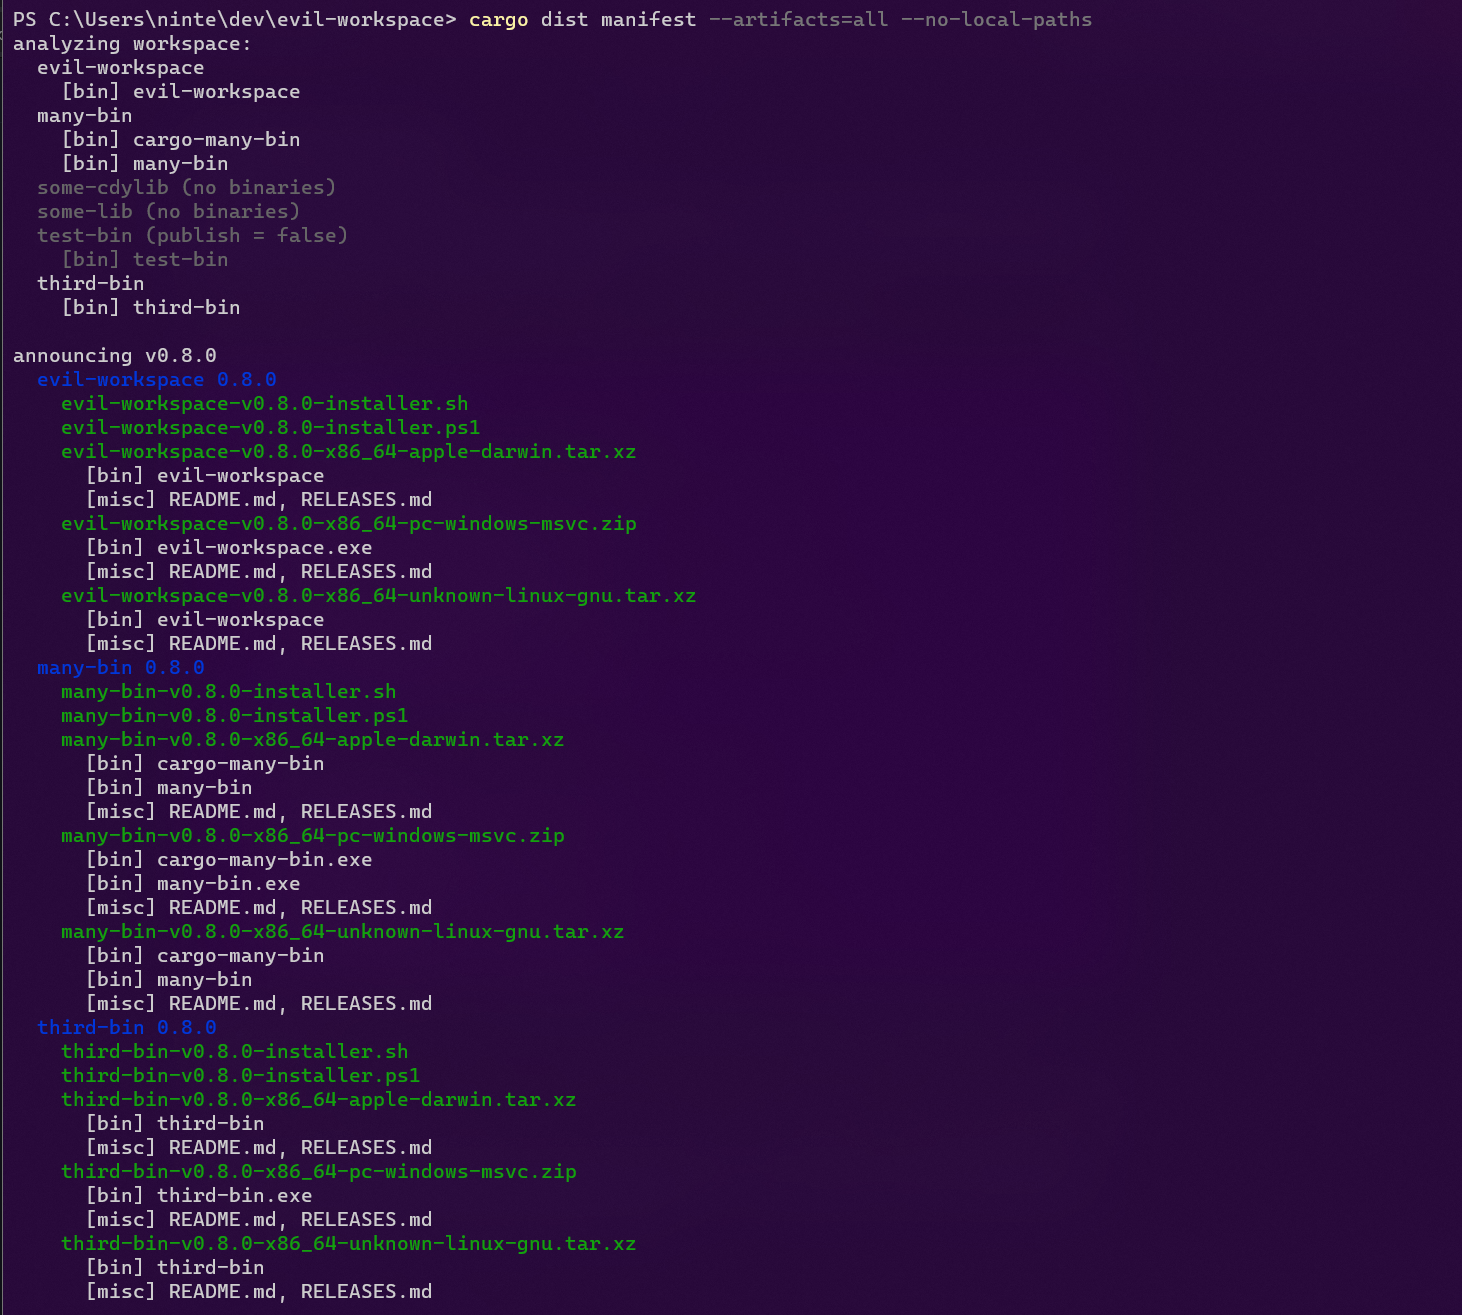 A screenshot of running cargo dist manifest --artifacts=all on a really complicated workspace with multiple binary-having-packages and packages-with-multiple-binaries. It starts with a printout of what cargo-dist thinks your apps are, and then concludes with a printout of the announcement tag and all the artifacts that will be built.